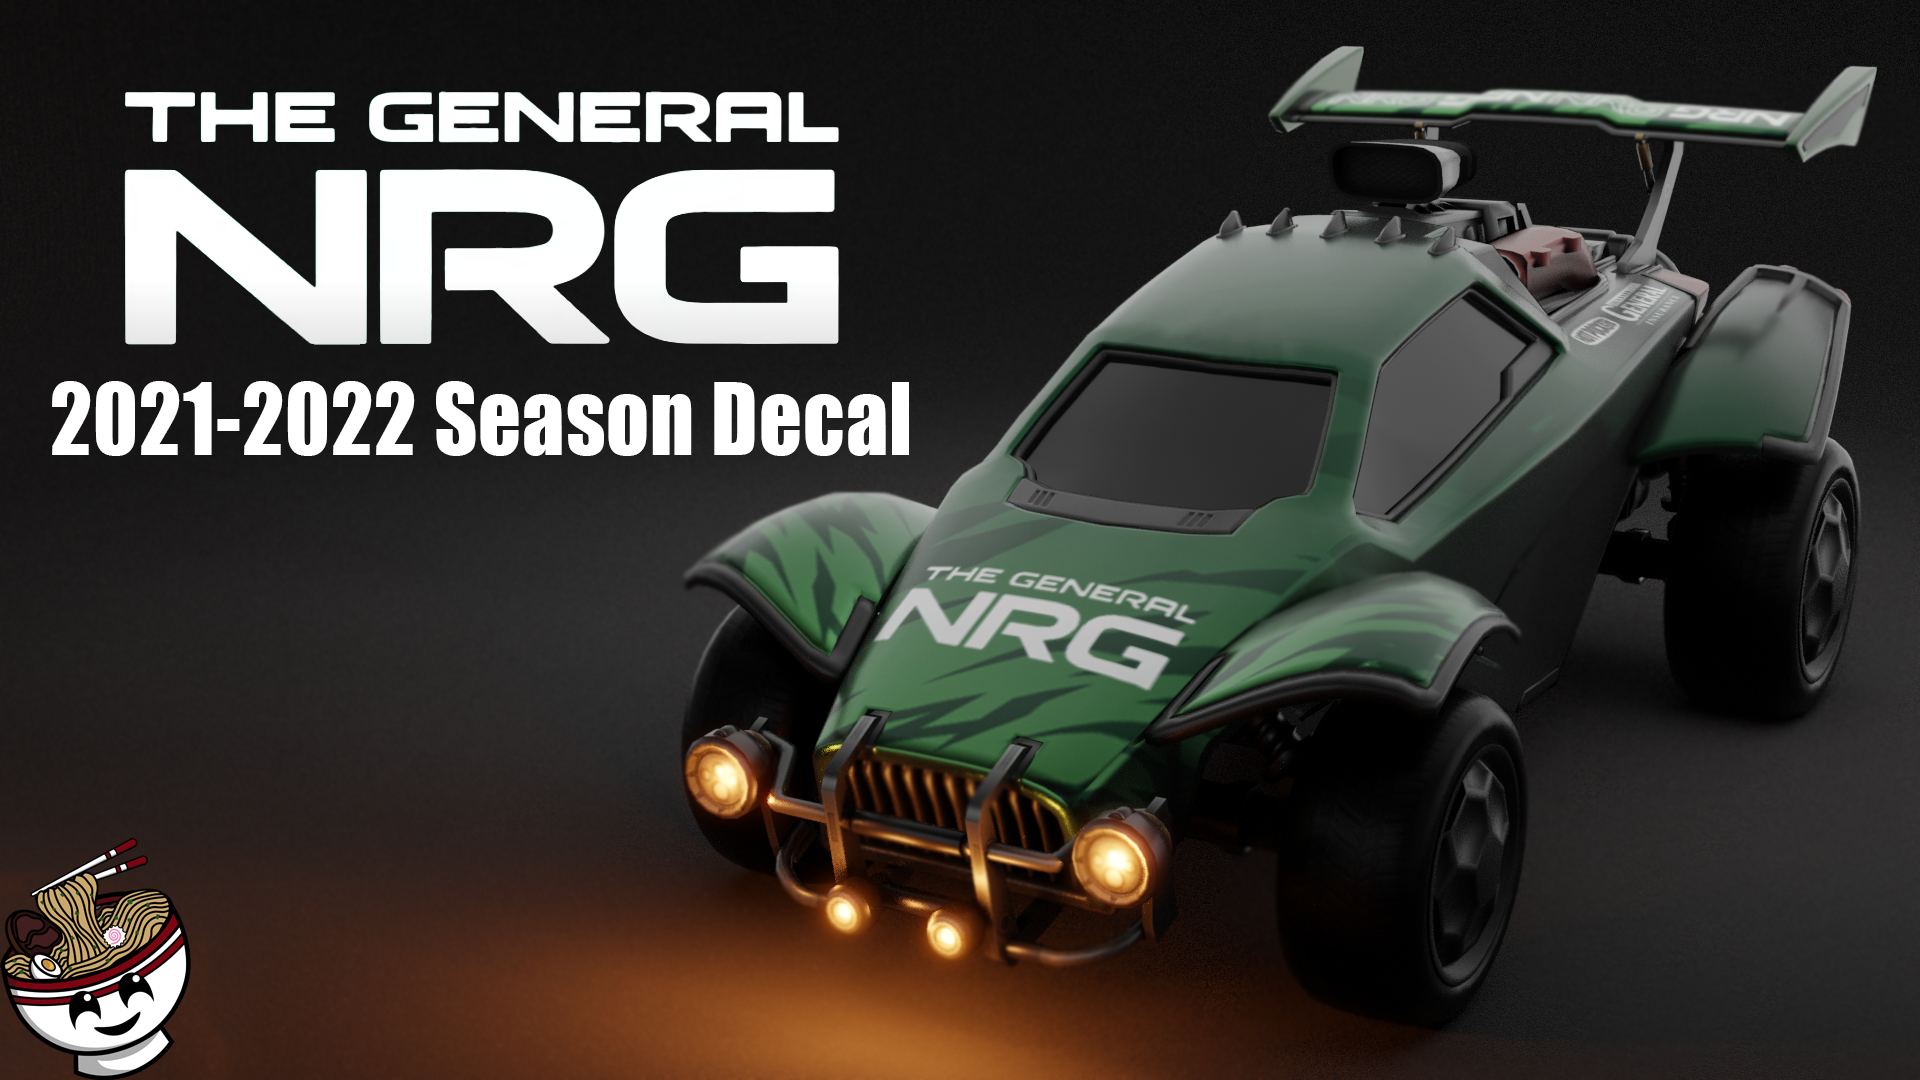 2021-2022 The General NRG